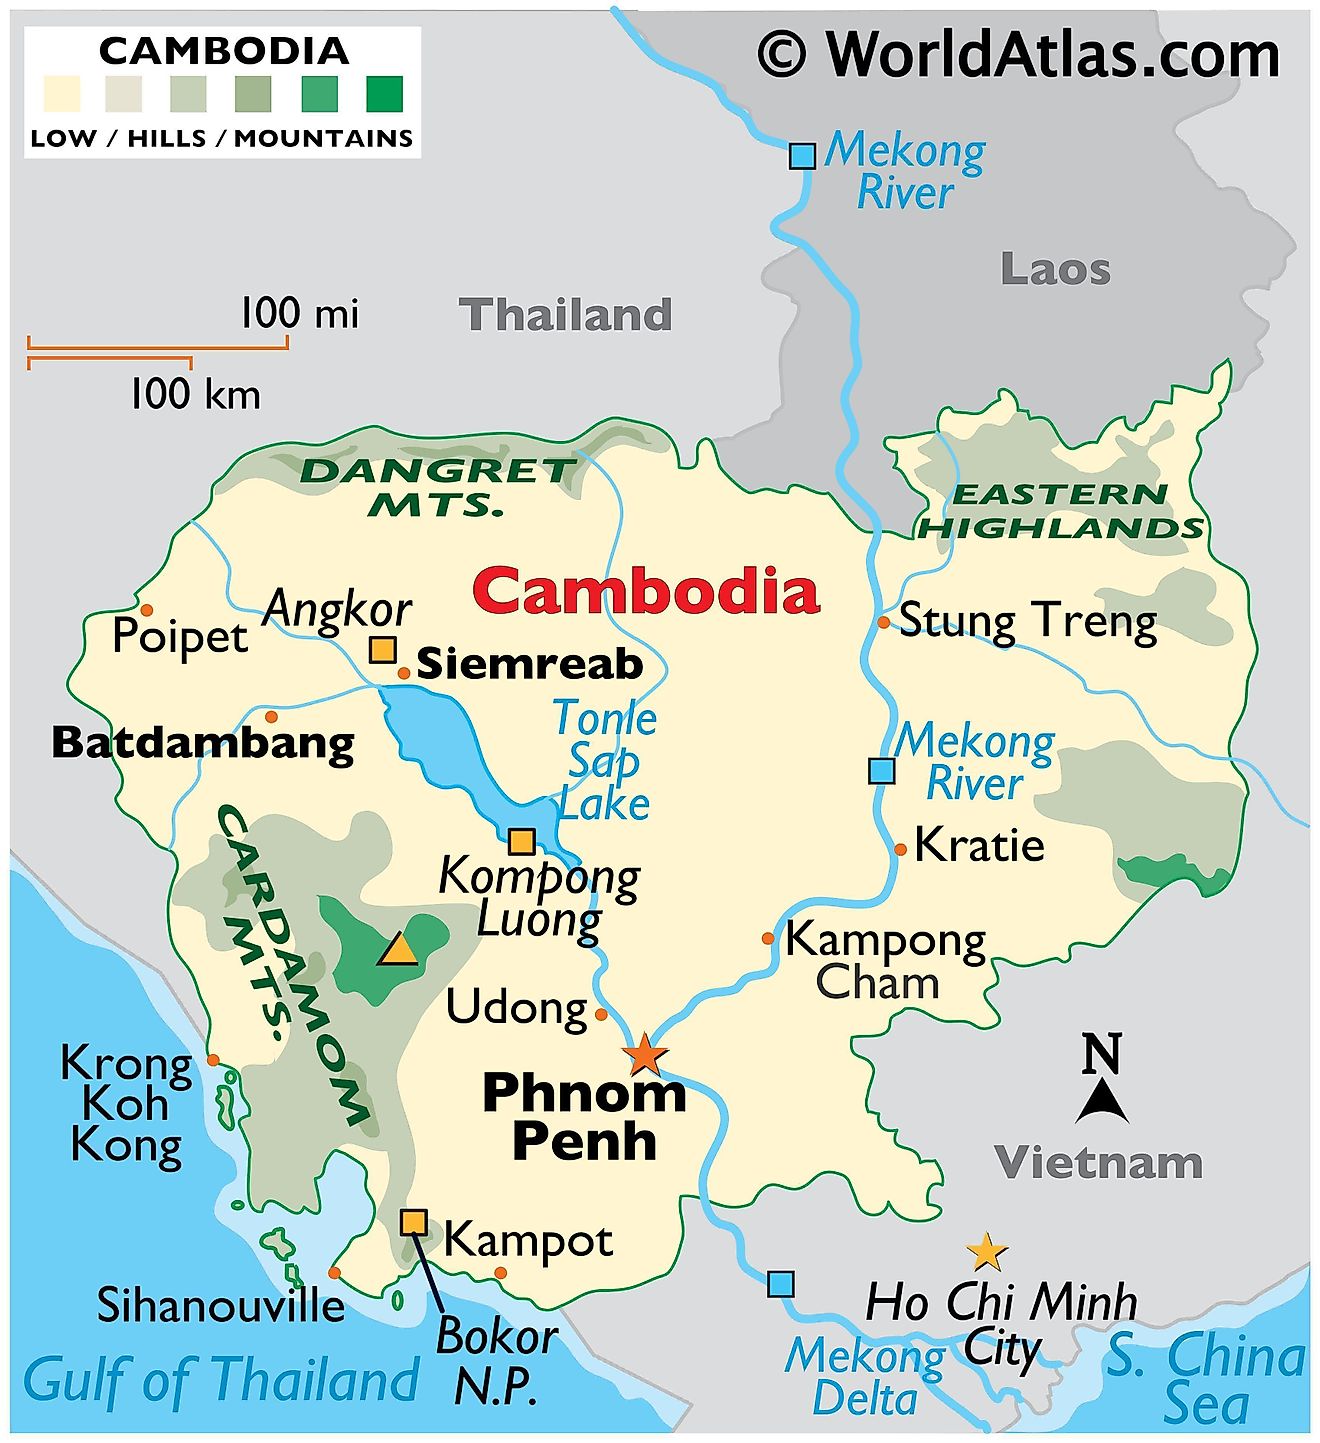 Physical Map of Cambodia showing relief, highest point, the Tonle Sap Lake, major rivers, mountains, and important cities.